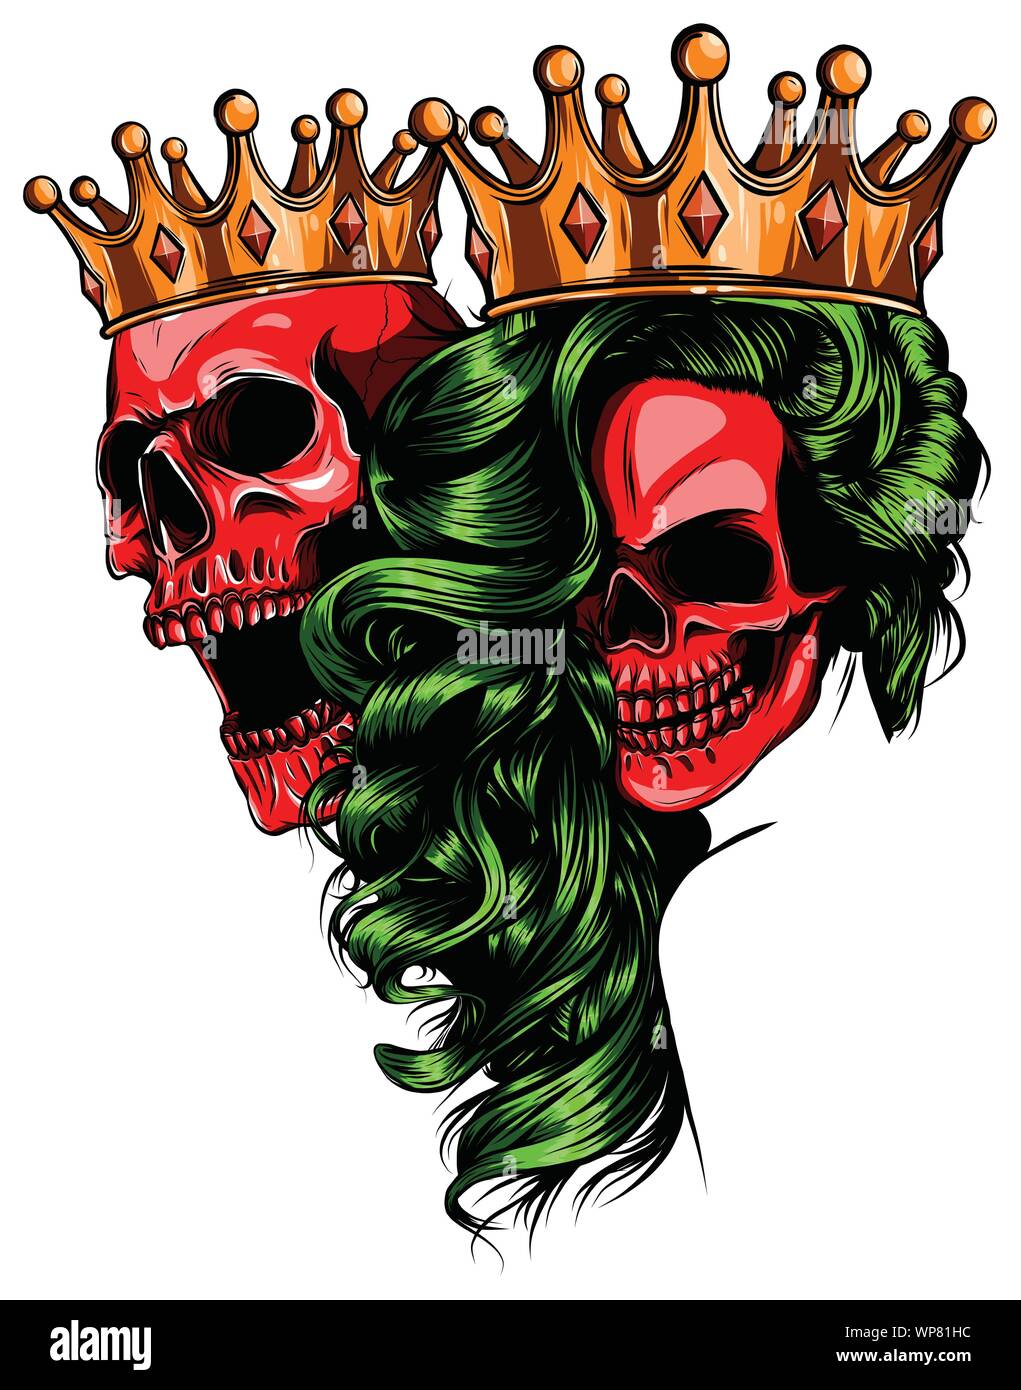 King and queen of death. Portrait of a skull with a crown. Stock Vector